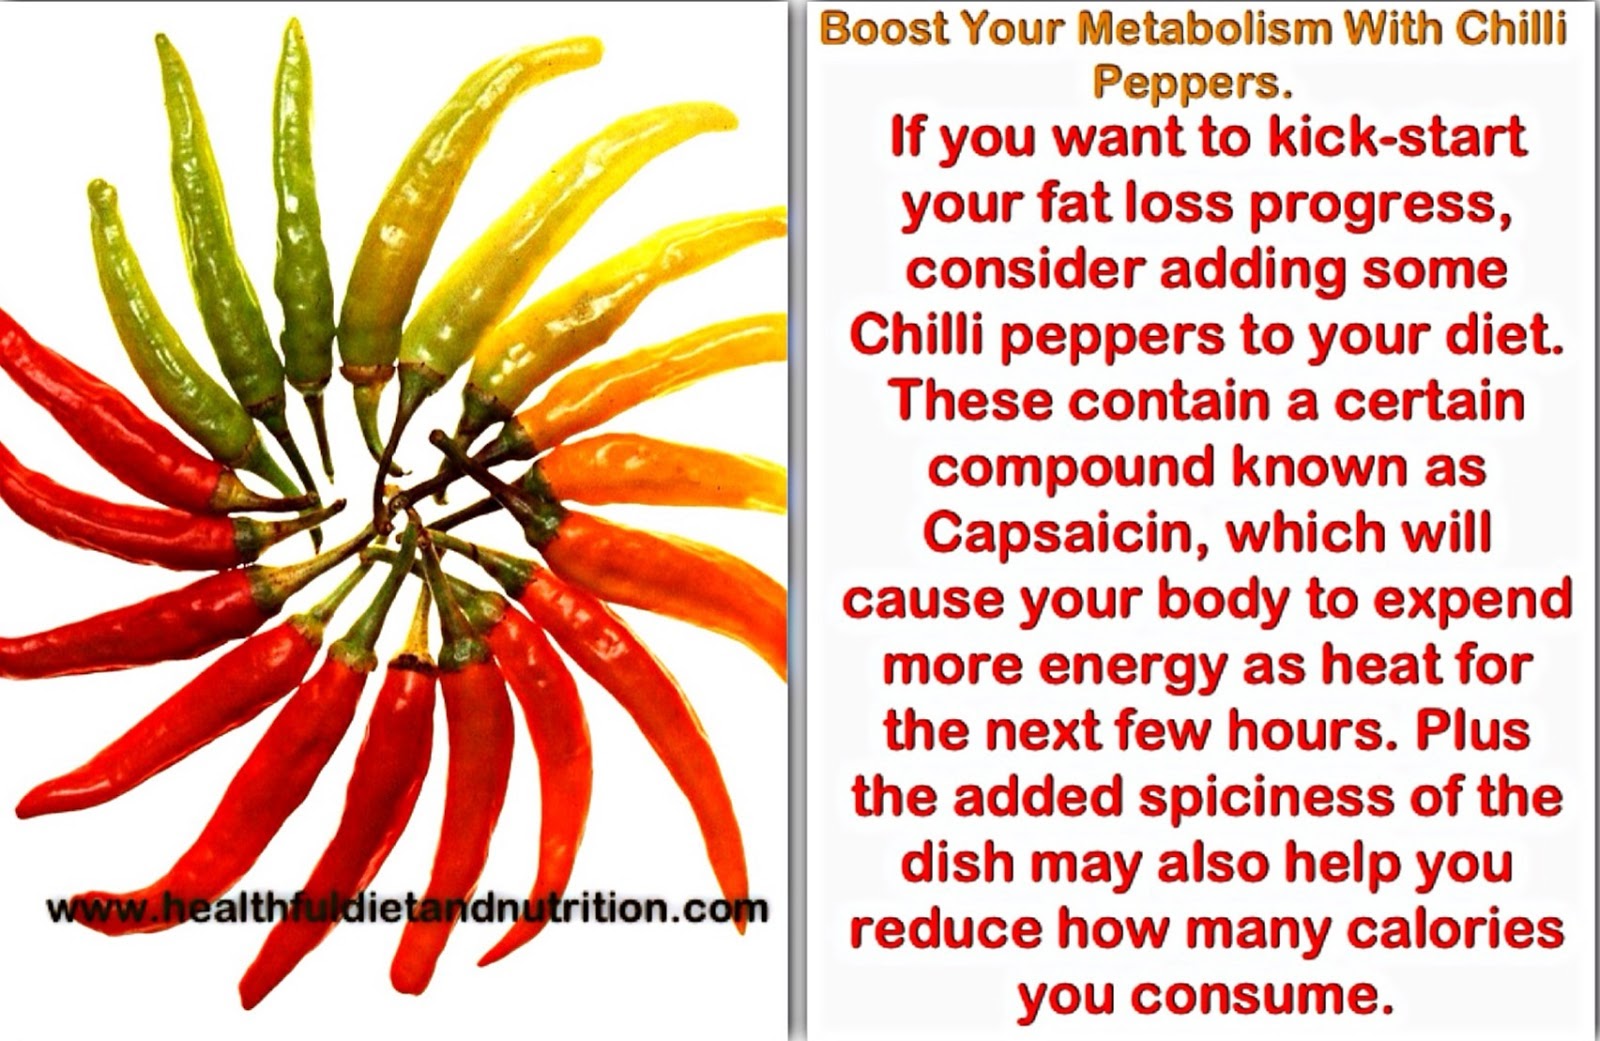 If you want to kick-start your fat loss progress, consider adding some Chilli peppers to your diet. These contain a certain compound known as Capsaicin, which will cause your body to expend more energy as heat for the next few hours. Plus the added spiciness of the dish may also help you reduce hown many calories you consume.